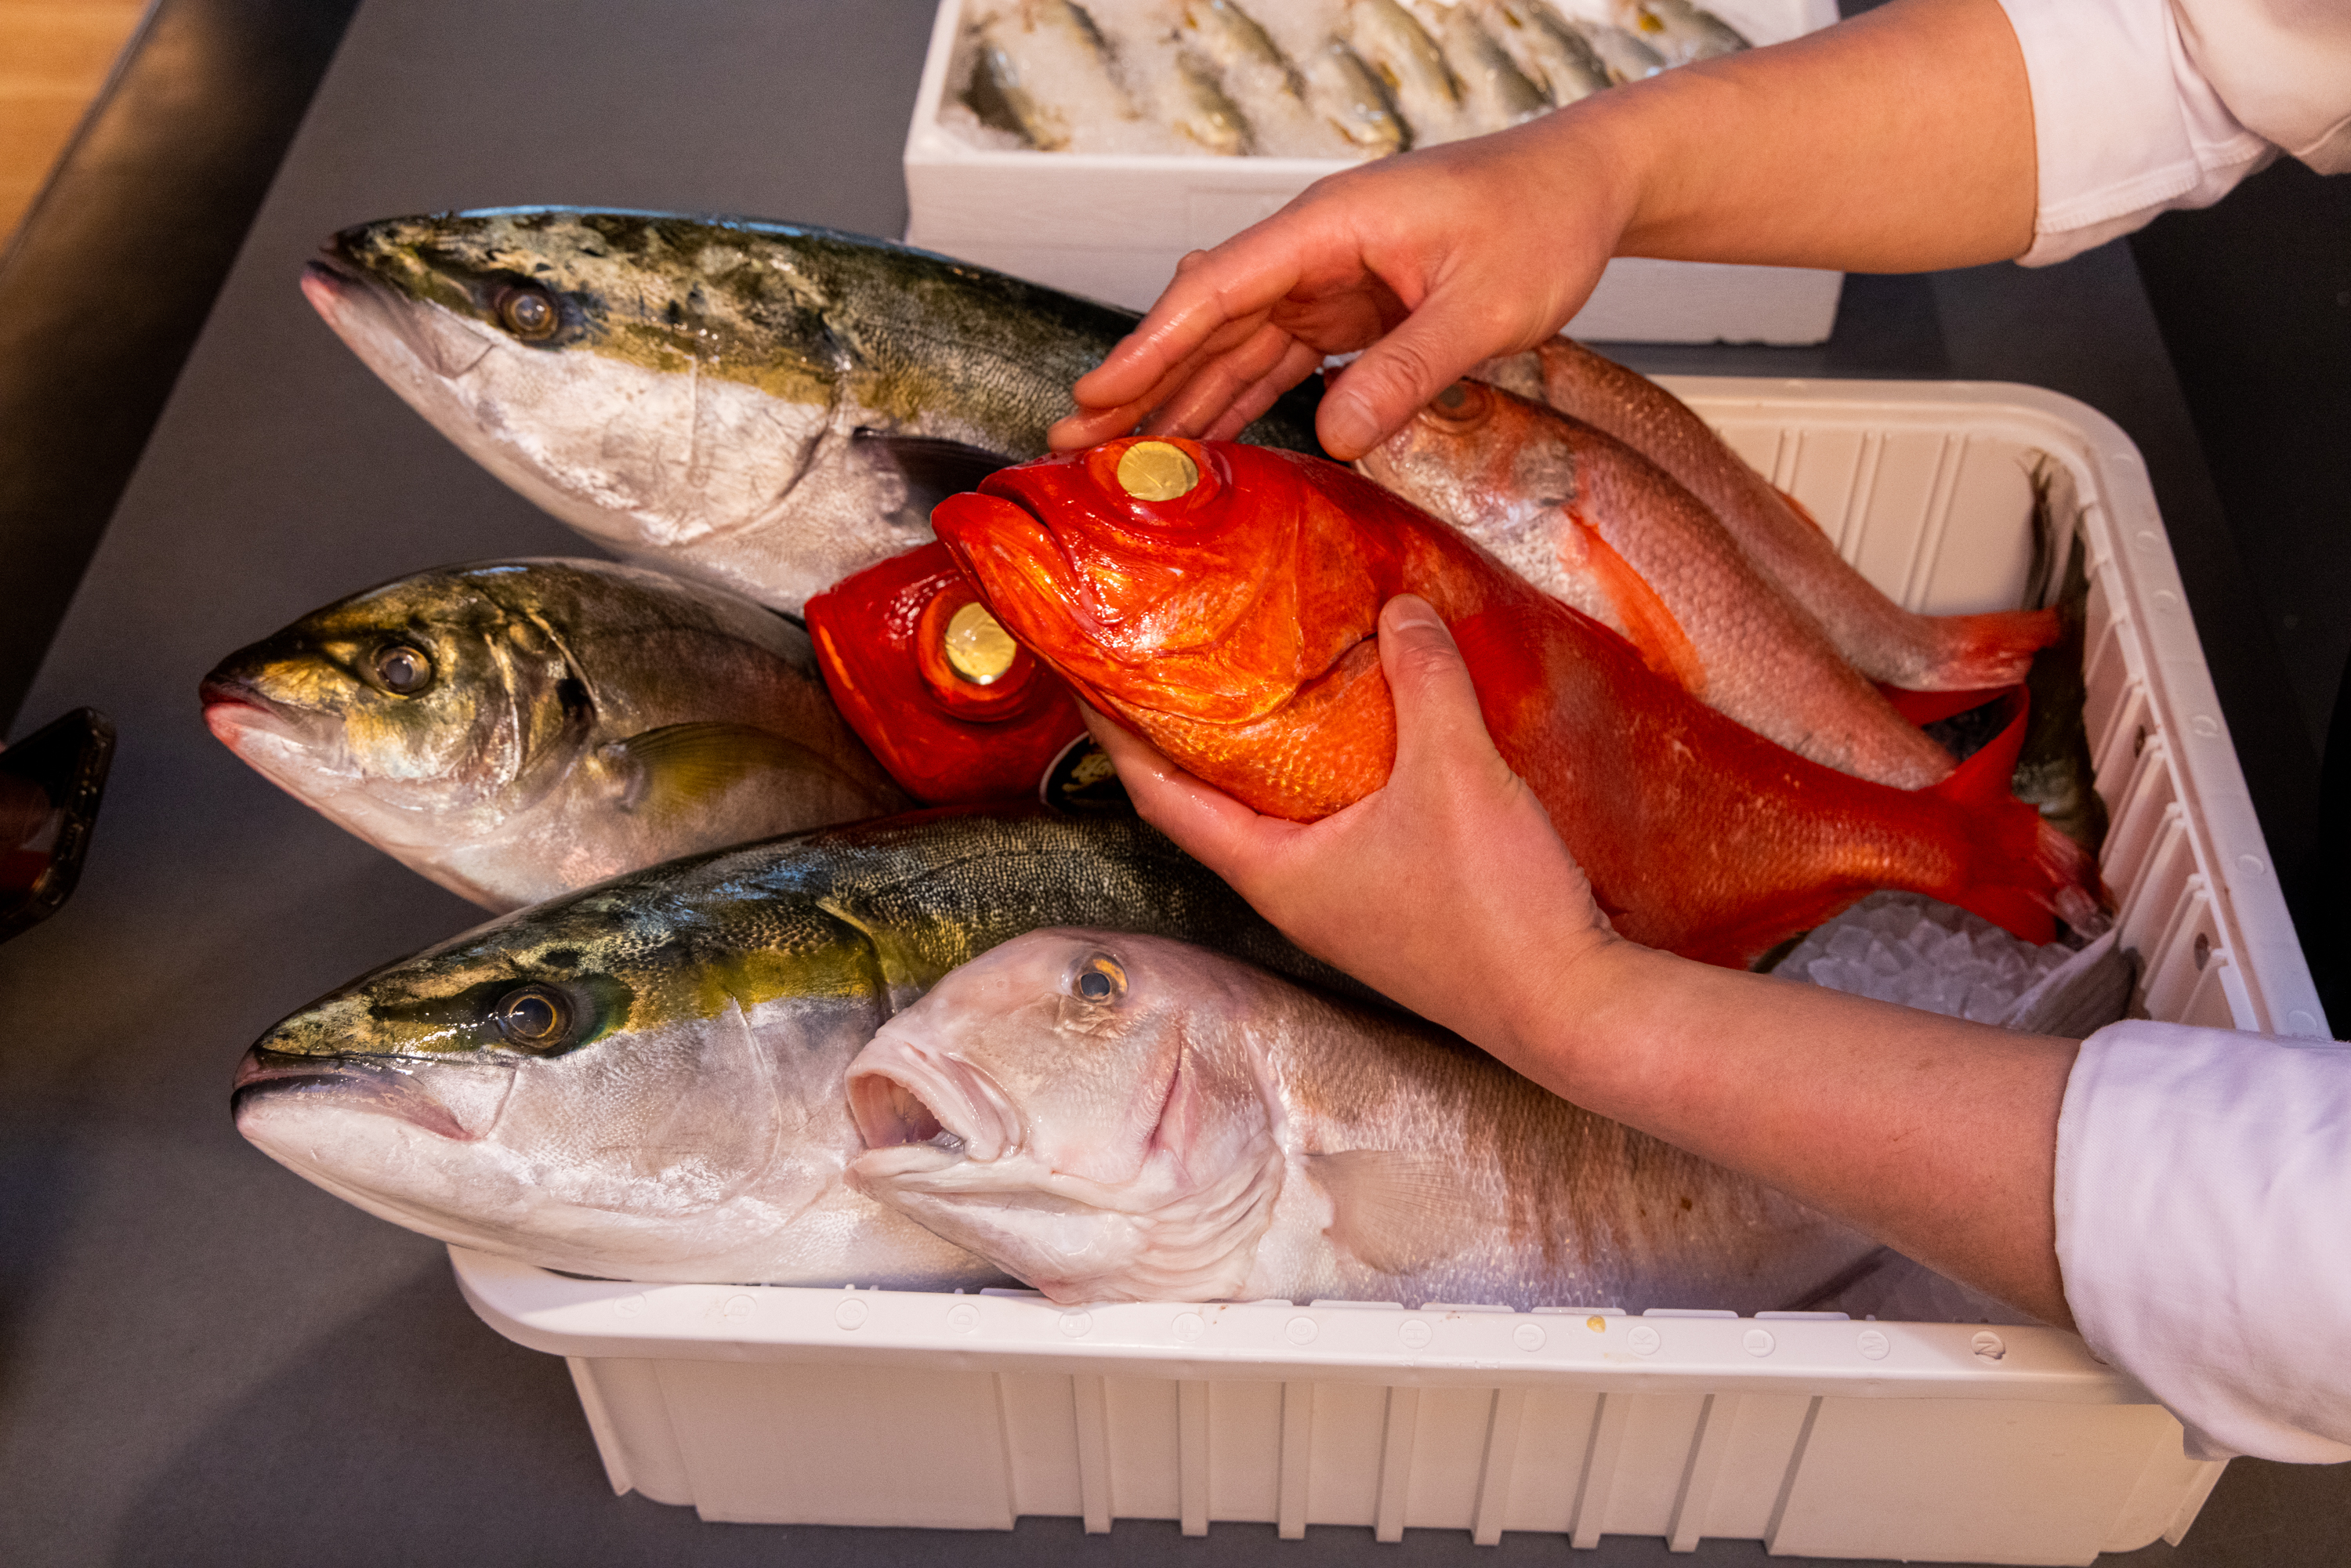 Several large fish, including greenish and bright red ones, are in a white container on ice. A person's hands hold a bright red fish.